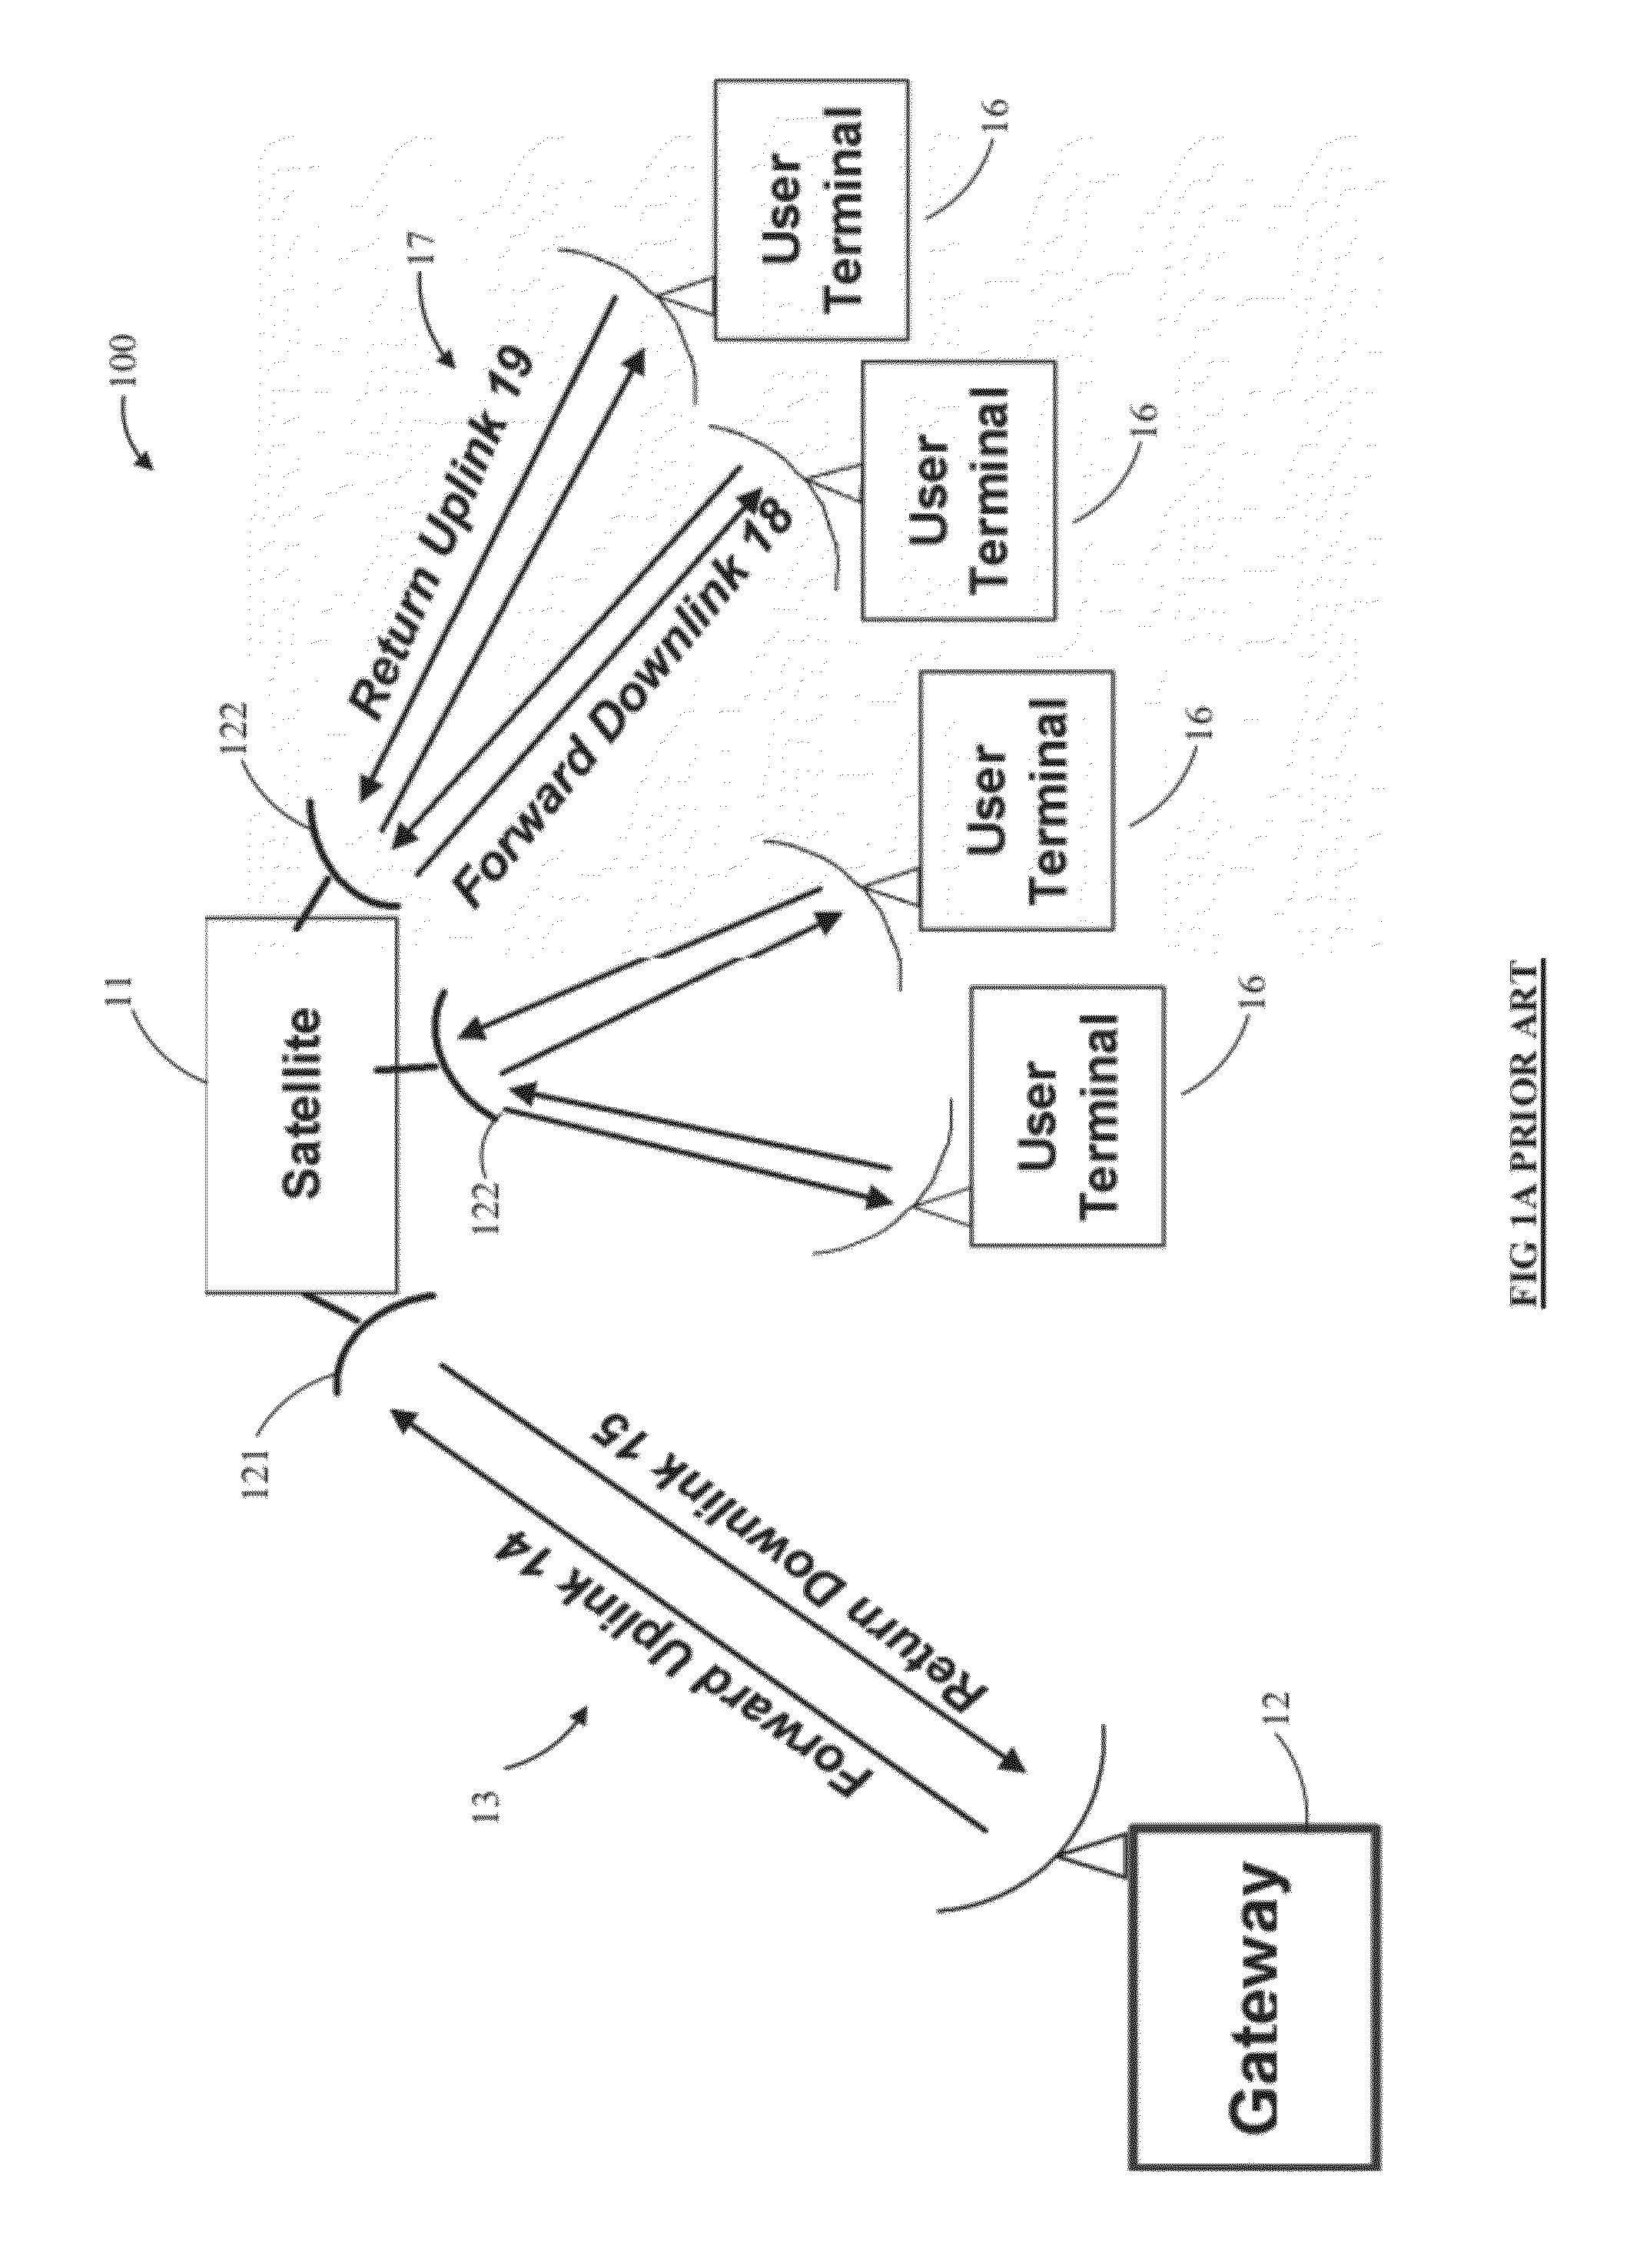 Broadband Satellite with Dual Frequency Conversion and Bandwidth Aggregation